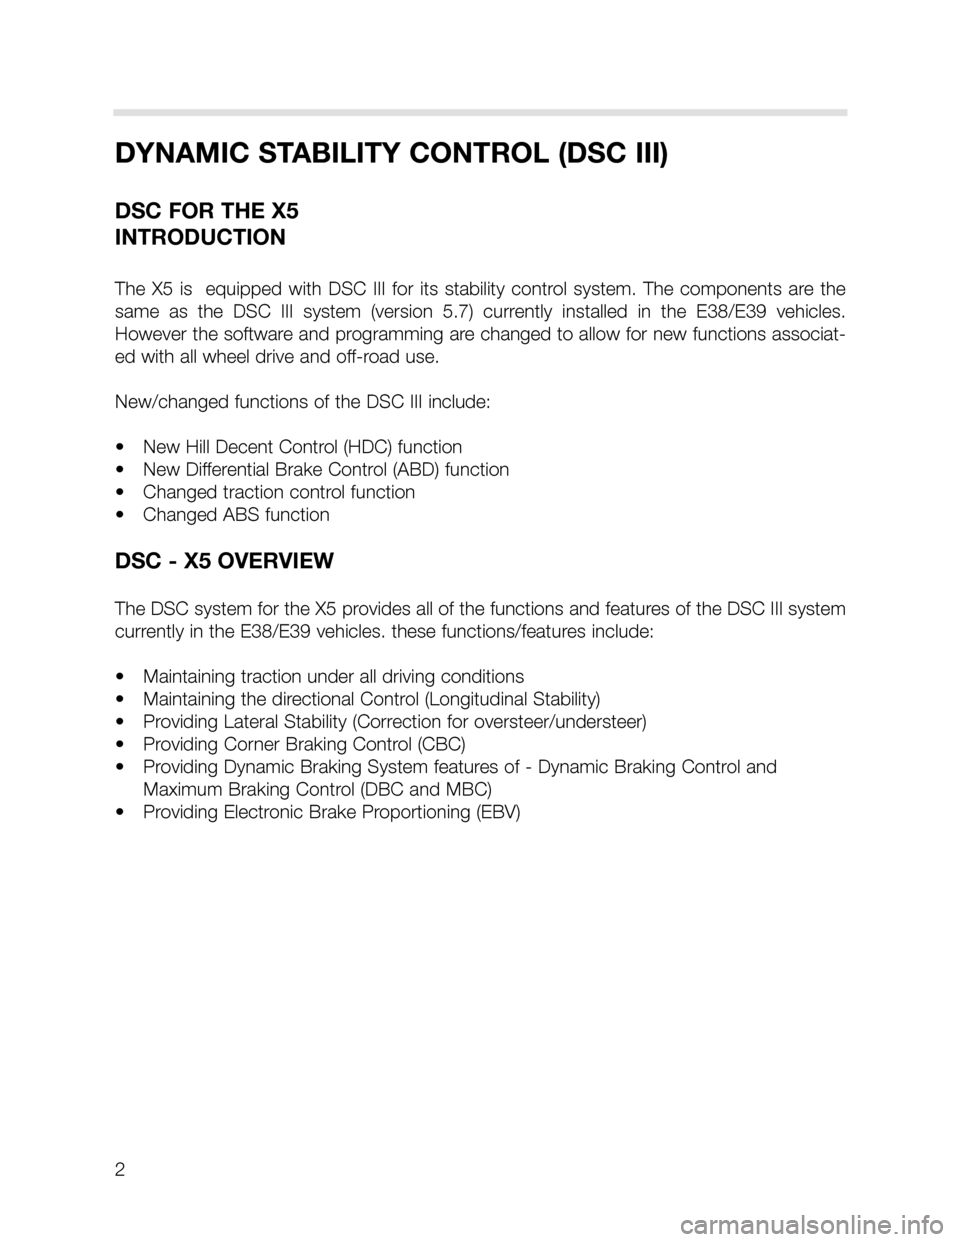 BMW X5 2005 E53 DSC System Workshop Manual 2
DYNAMIC STABILITY CONTROL (DSC III)
DSC FOR THE X5
INTRODUCTION
The  X5  is    equipped  with  DSC  III  for  its  stability  control  system.  The  components  are  the
same  as  the  DSC  III  sys